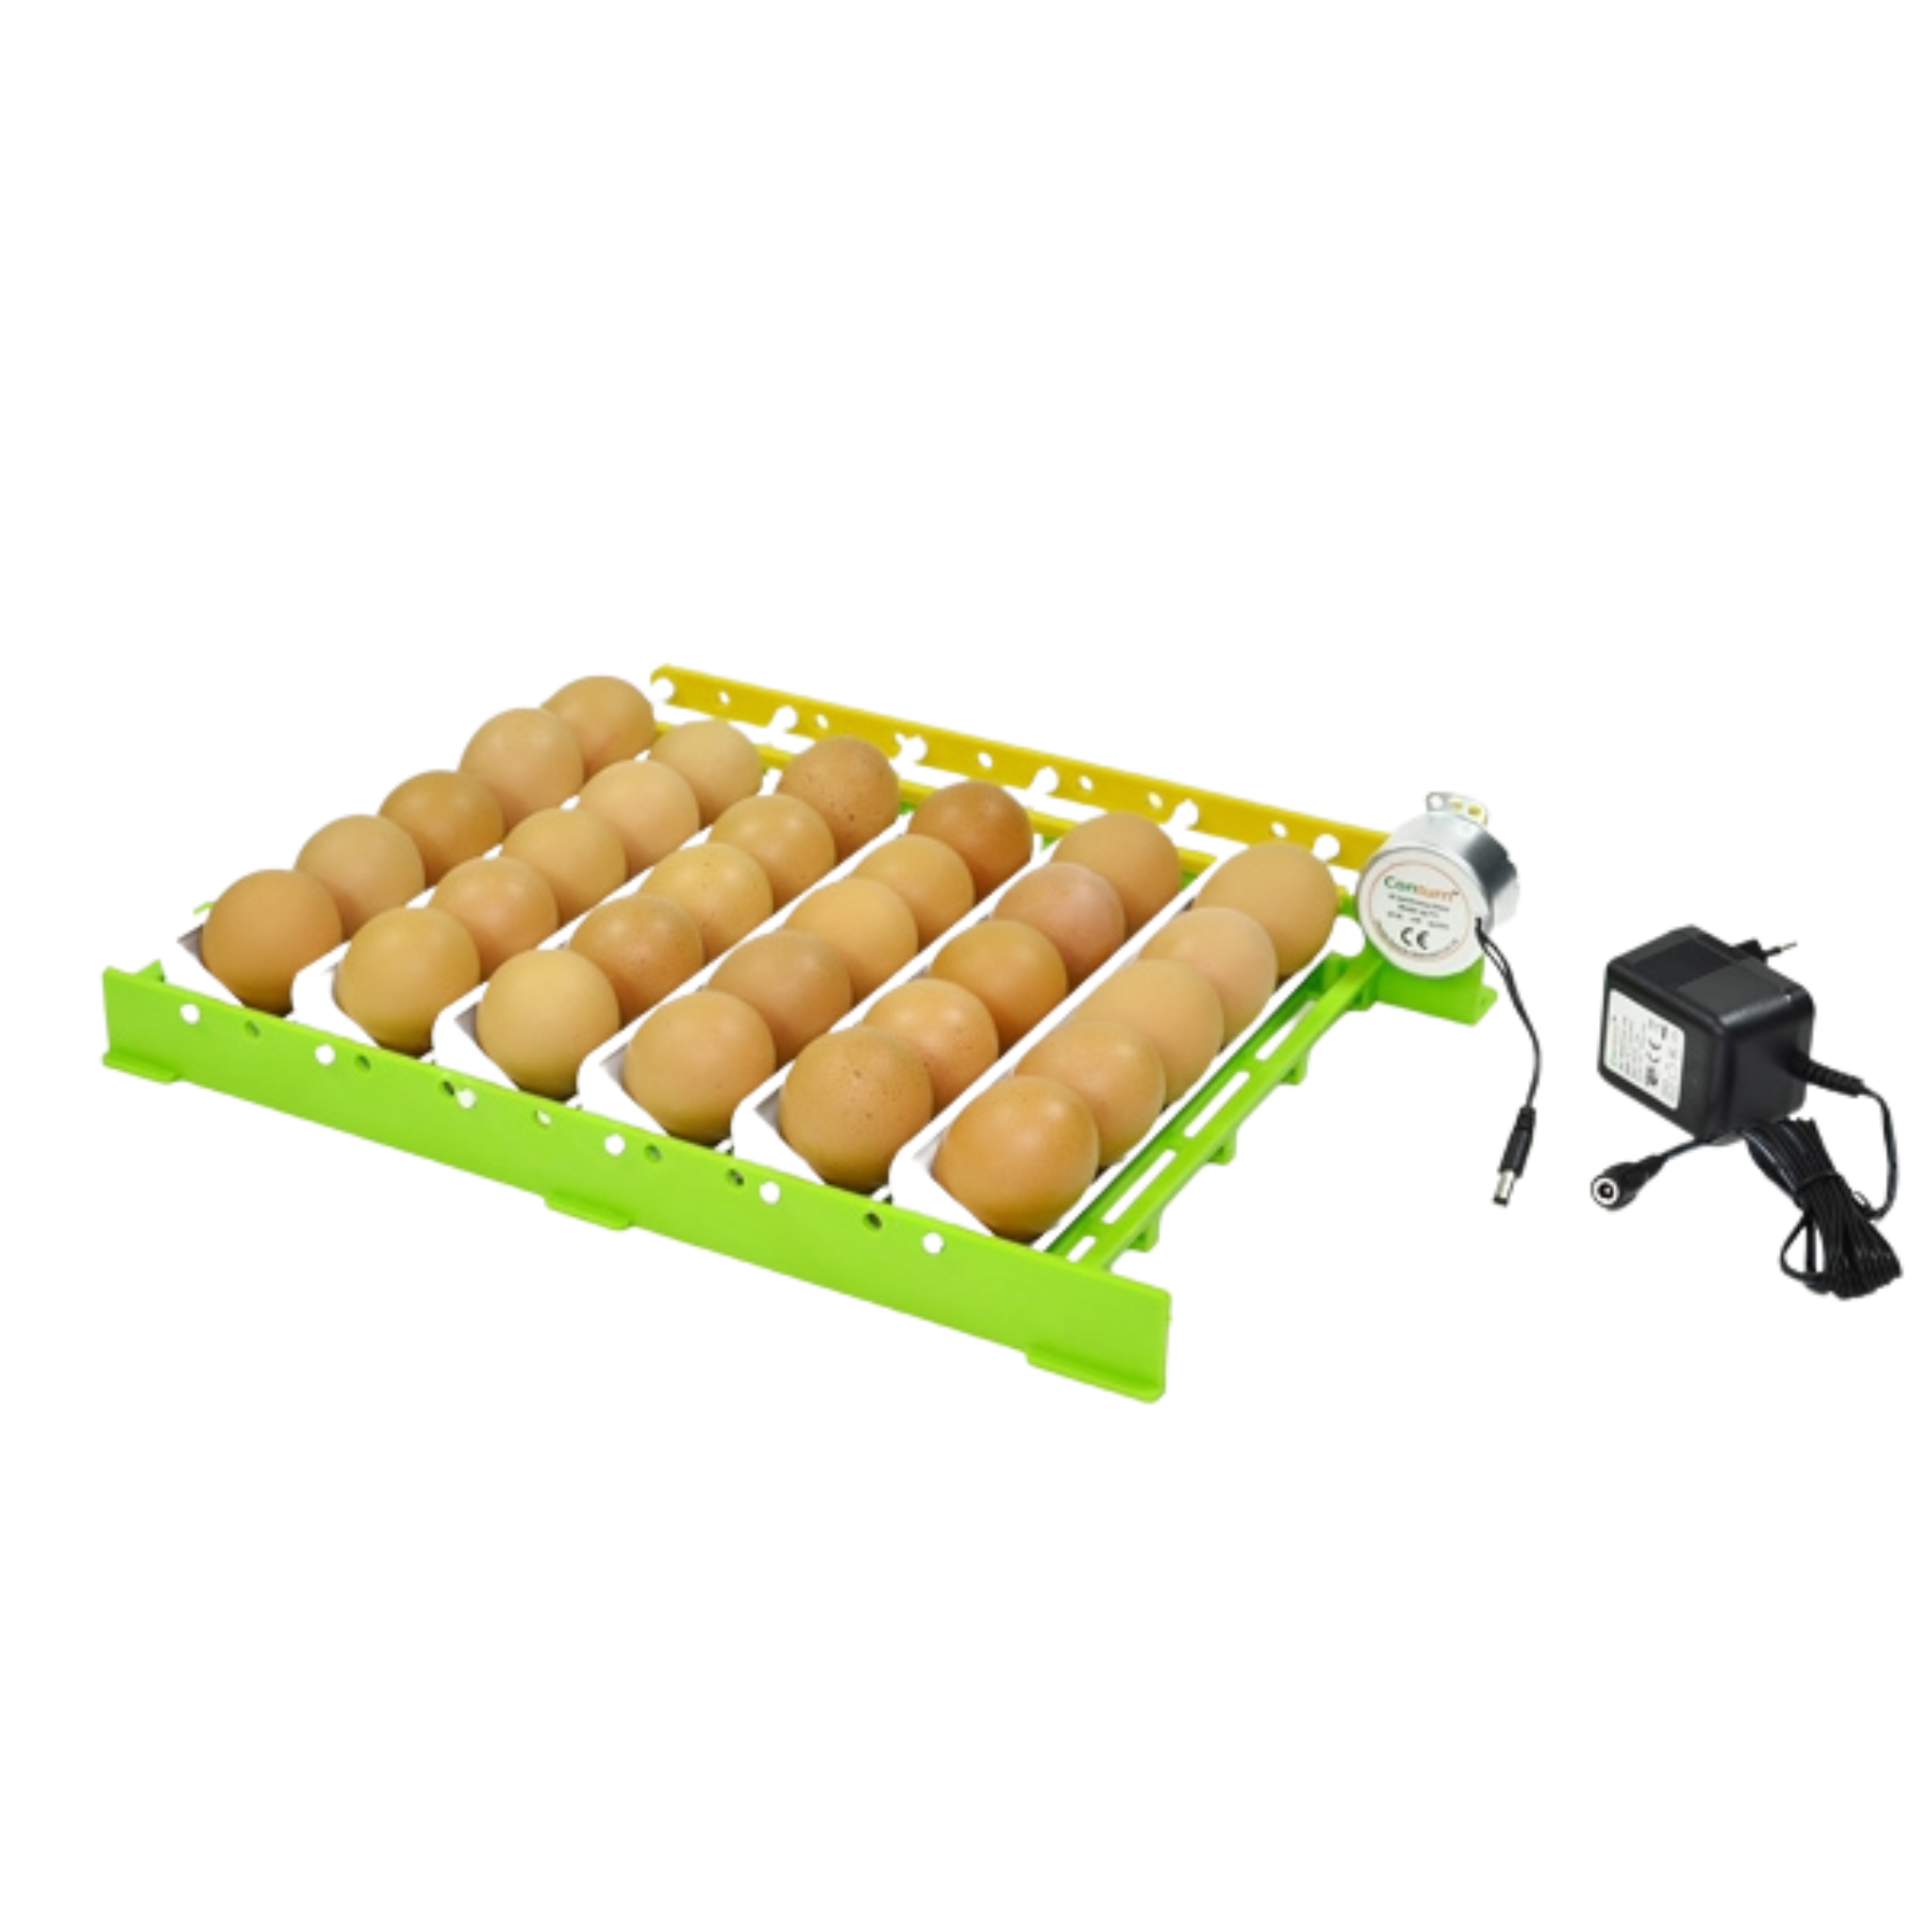 Hatching Time Cimuka. Egg setter tray with Conturn motor can be seen in image. 30 chicken eggs can be seen on racks.